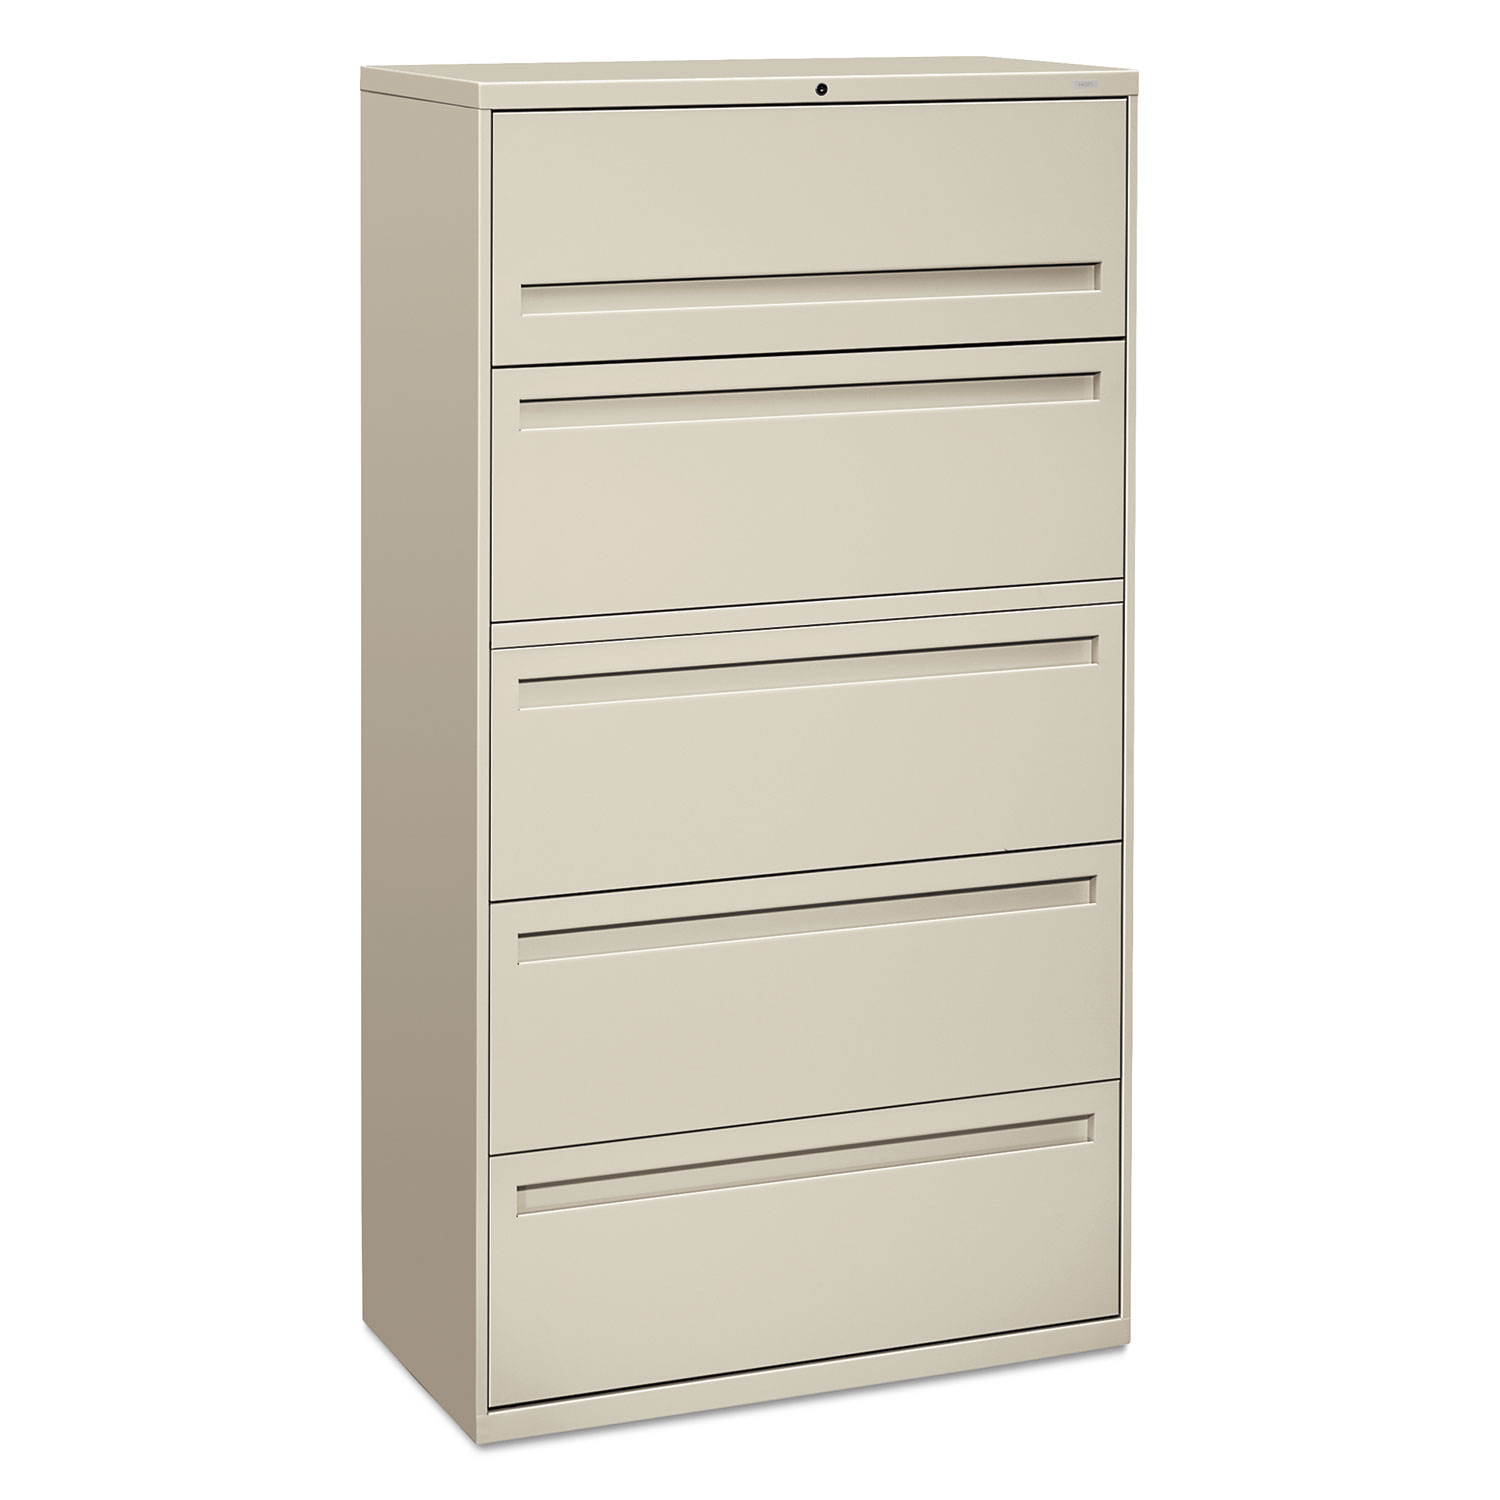  HON H785.L.Q 700 Series Five-Drawer Lateral File with Roll-Out Shelf, 36w x 18d x 64.25h, Light Gray (HON785LQ) 